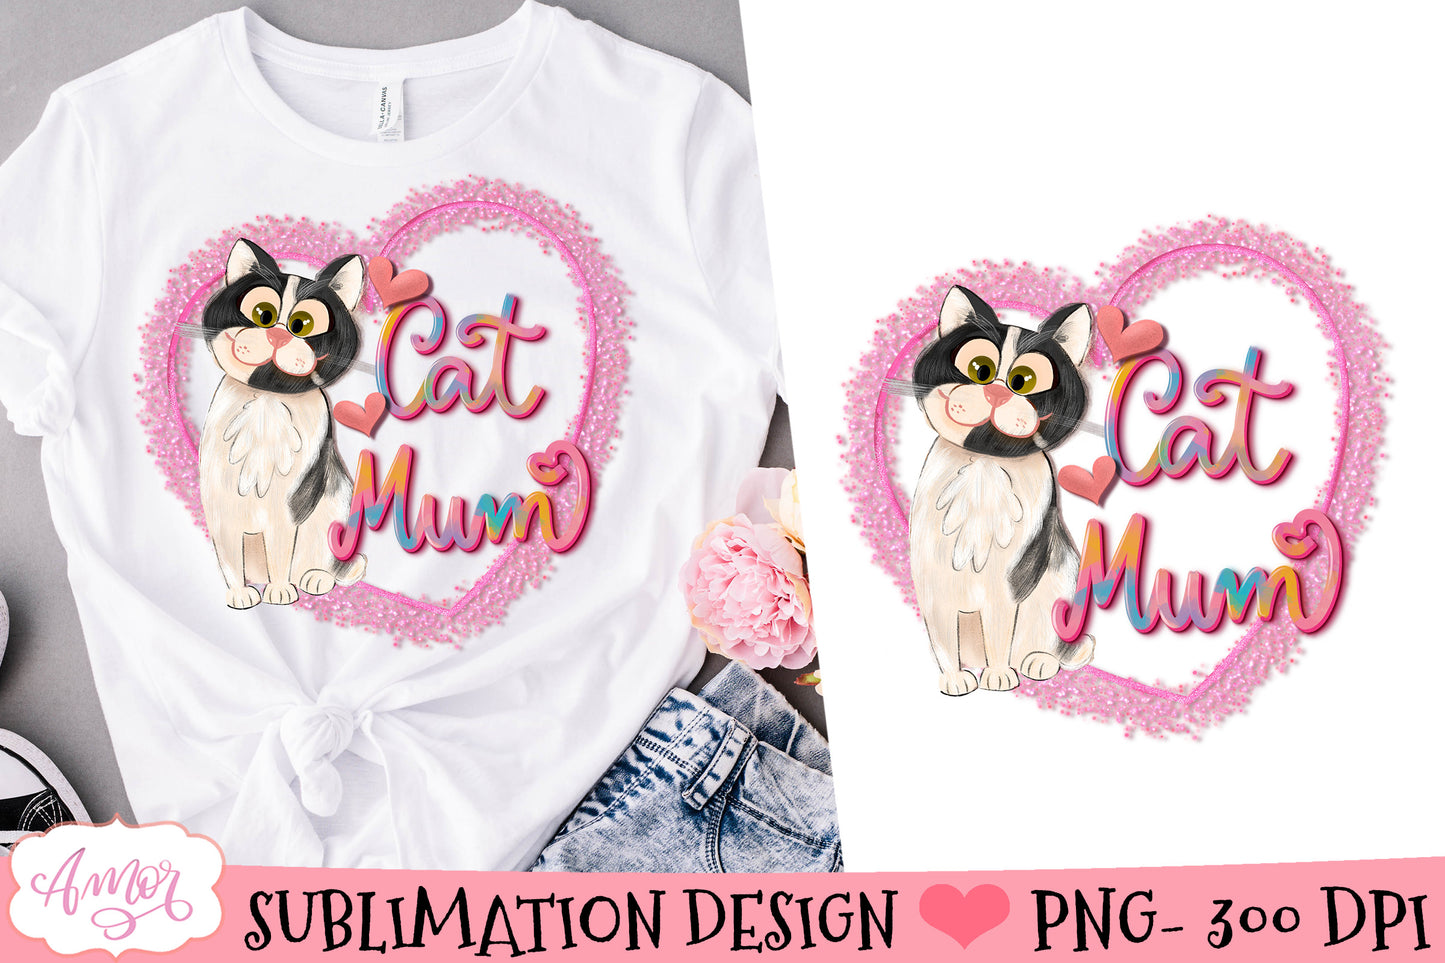 Cat mum Sublimation Design for T-shirts and mugs